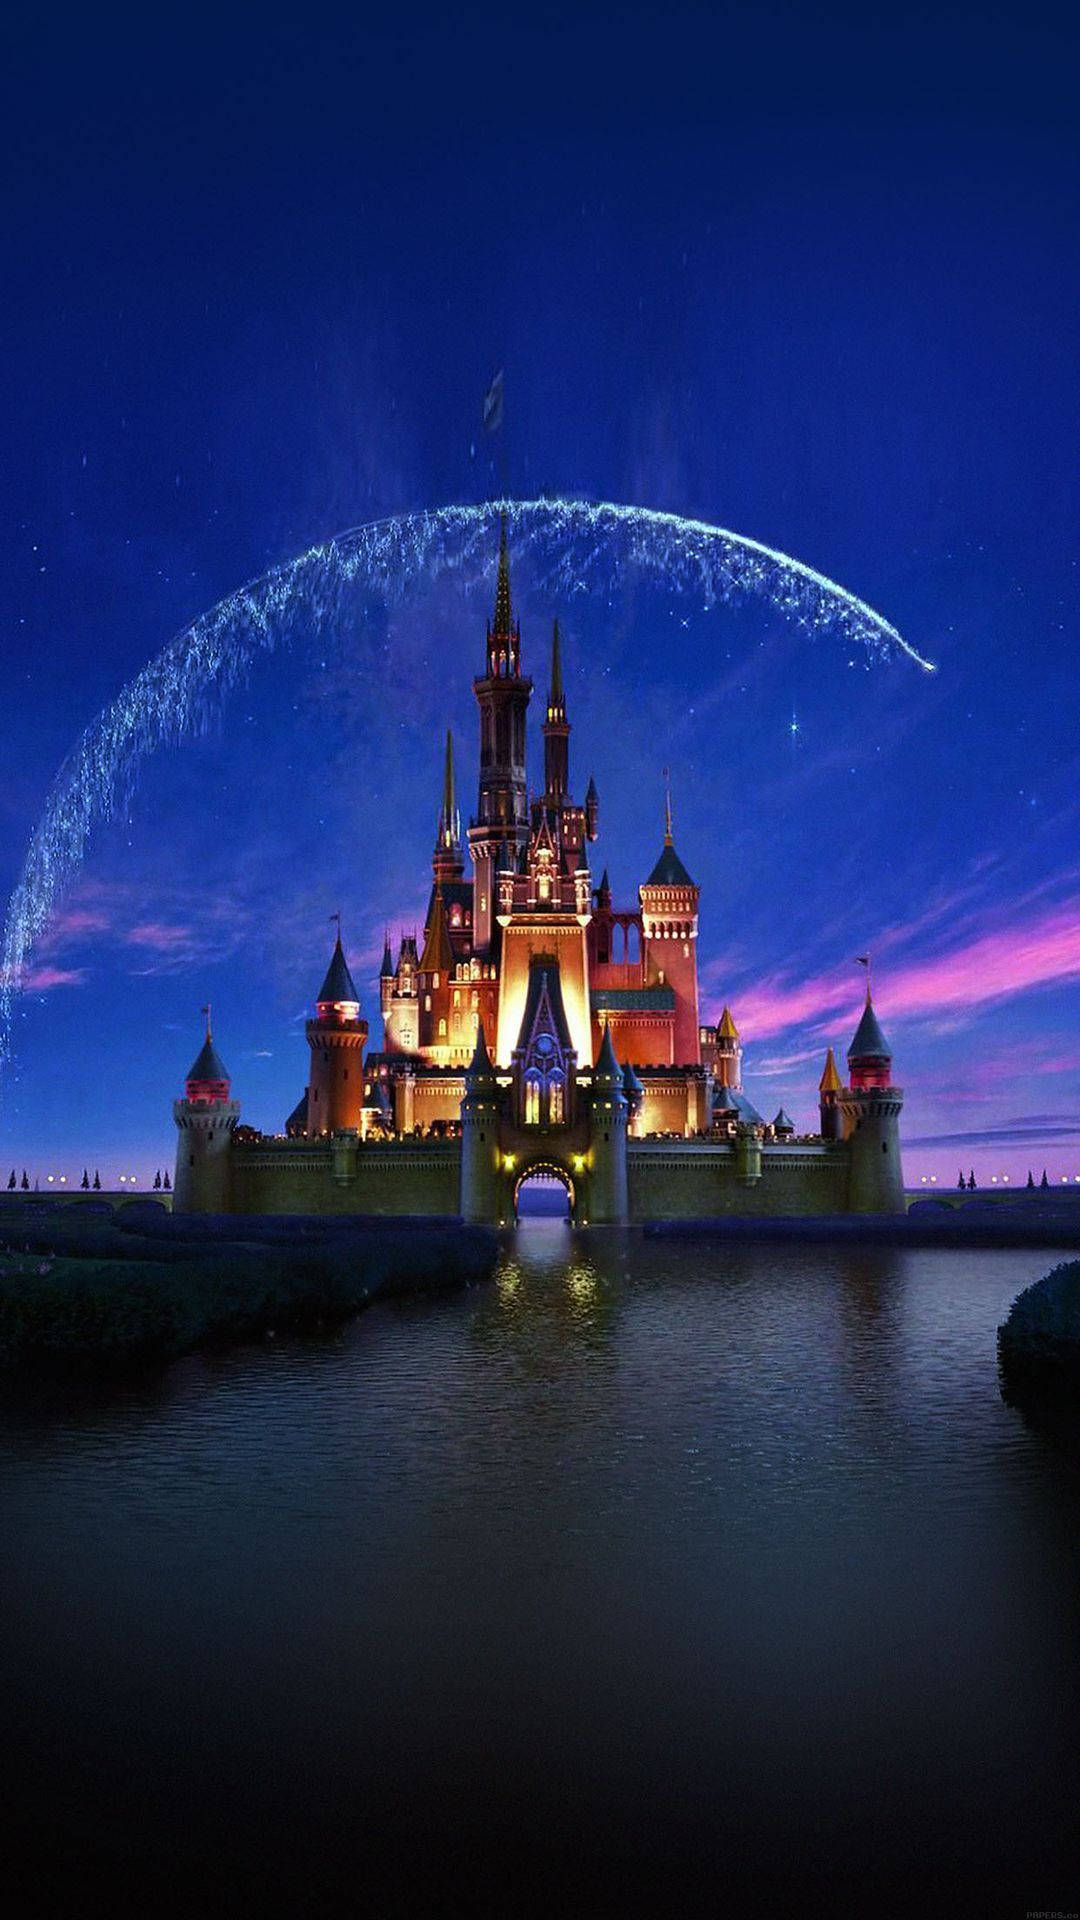 Disney Castle With Shooting Star